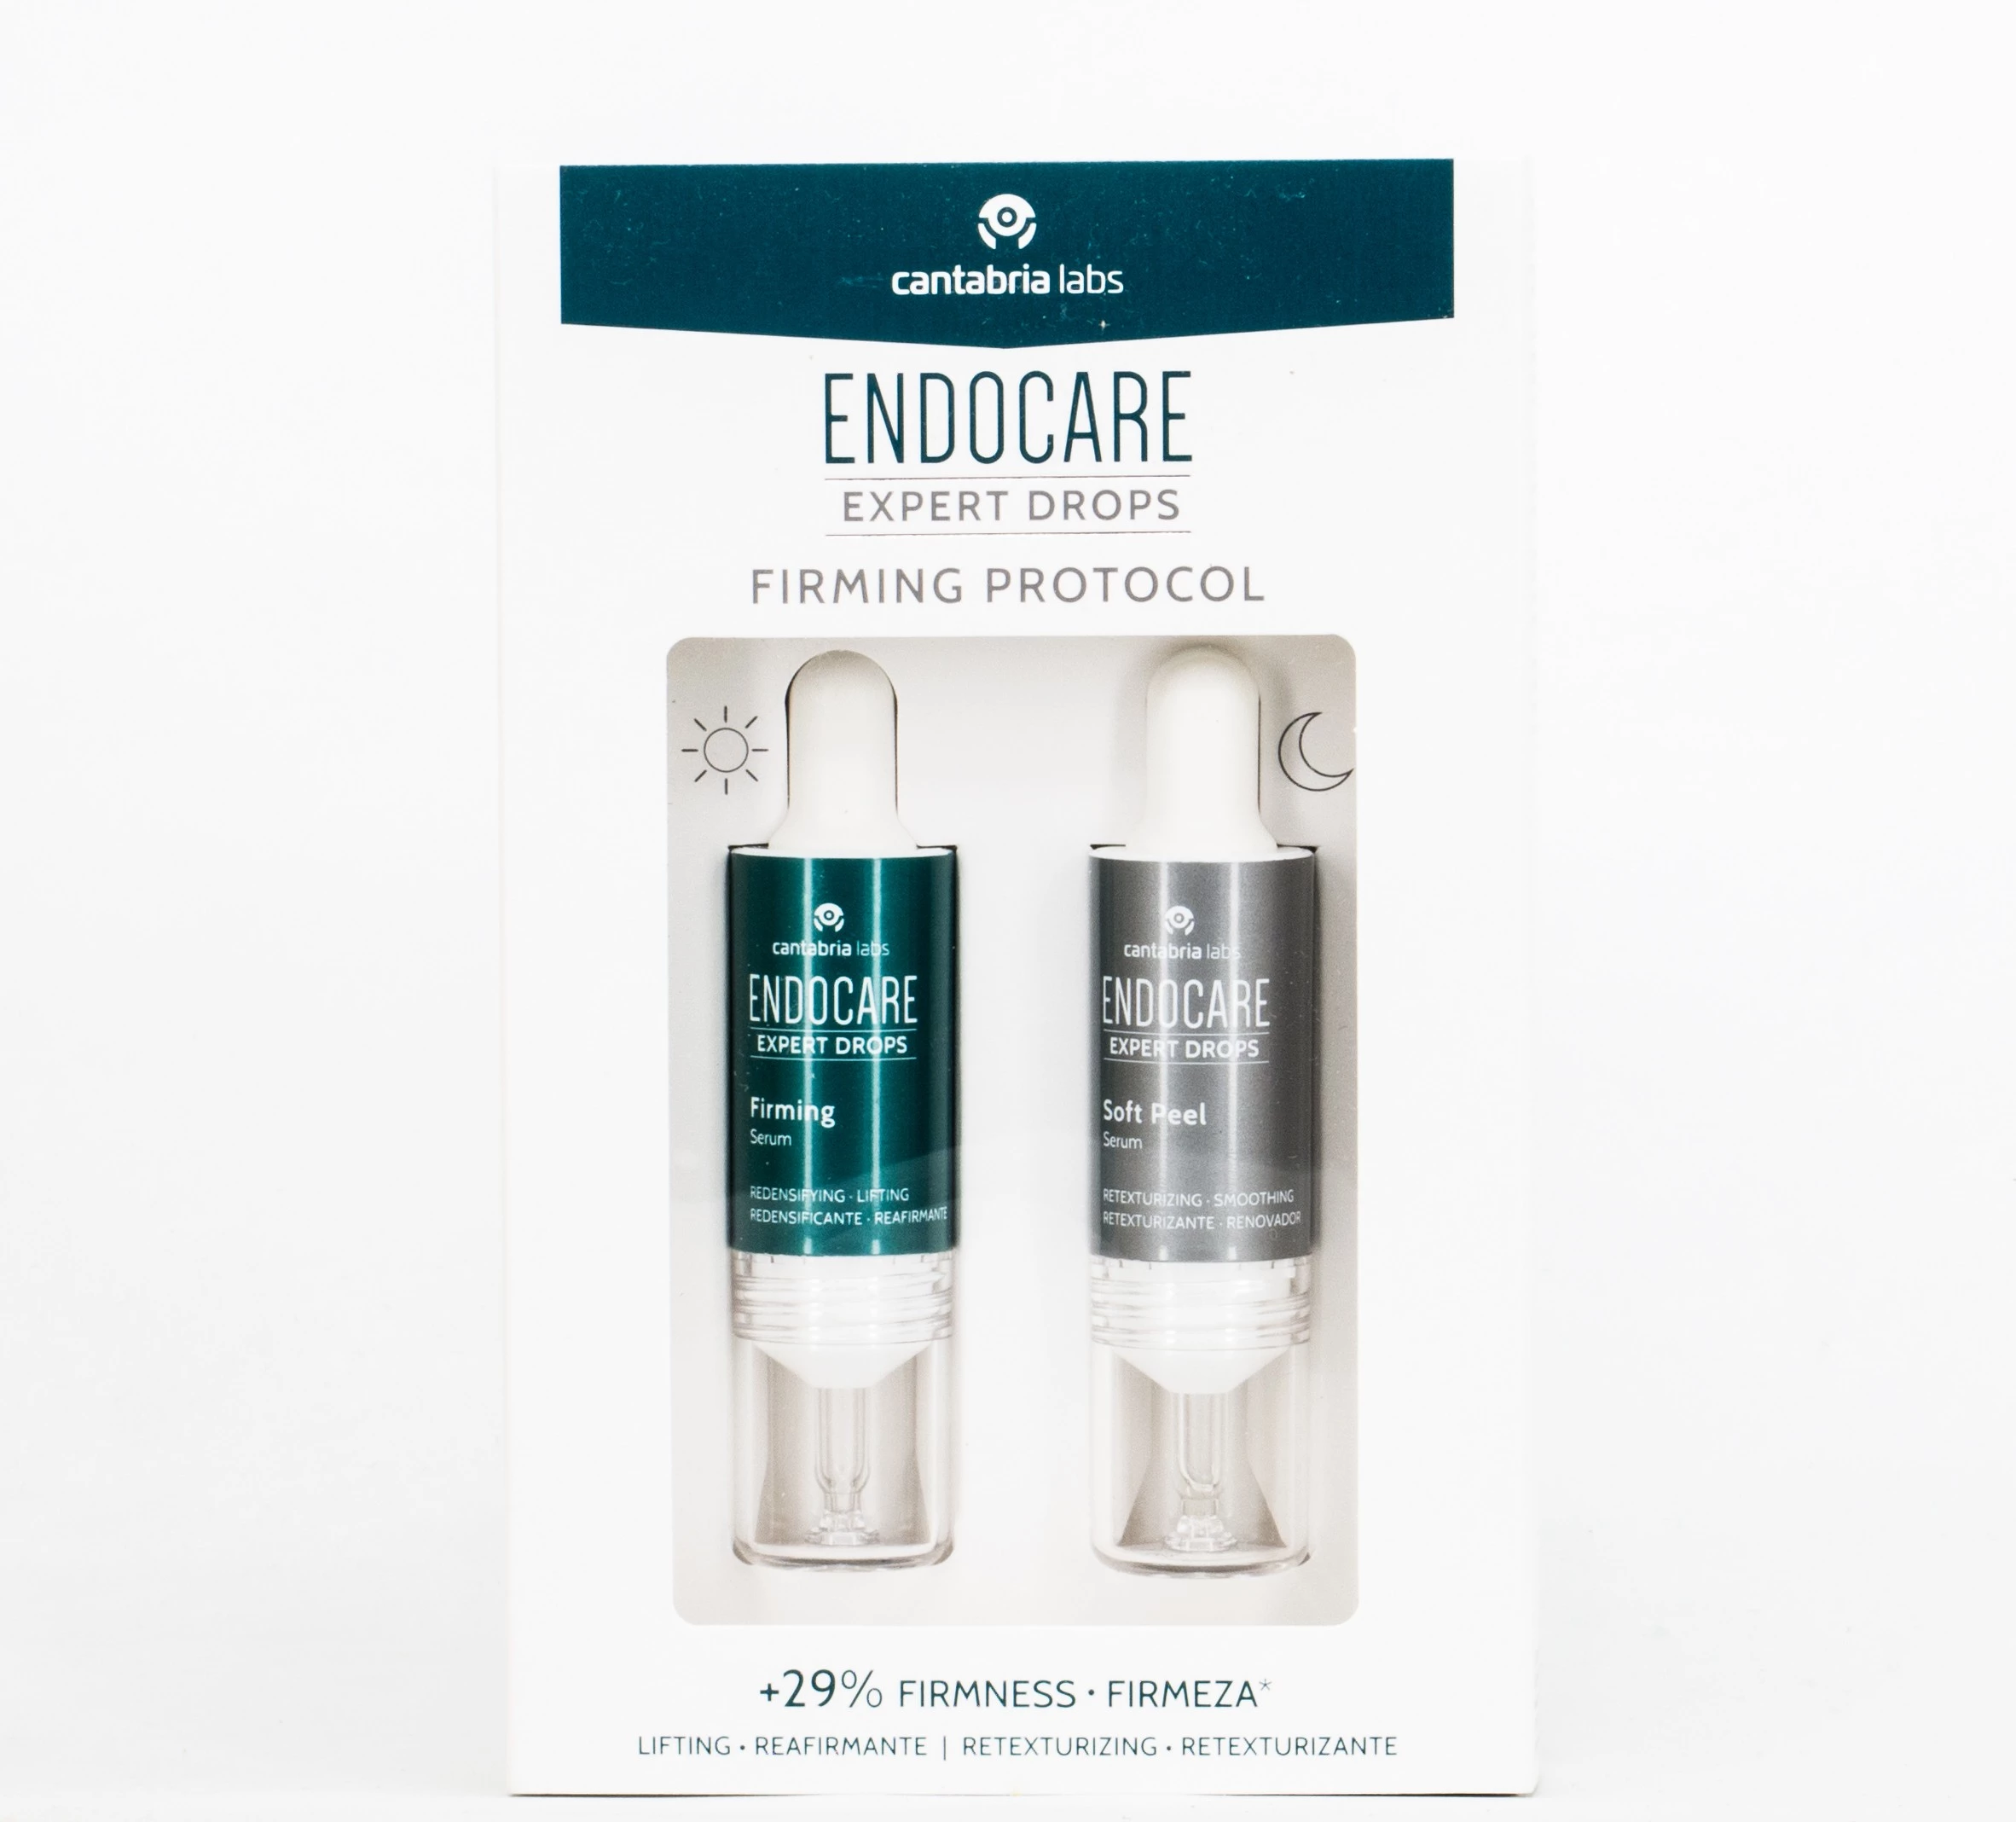 Endocare Expert Drops Firming Protocol, 2x10ml.